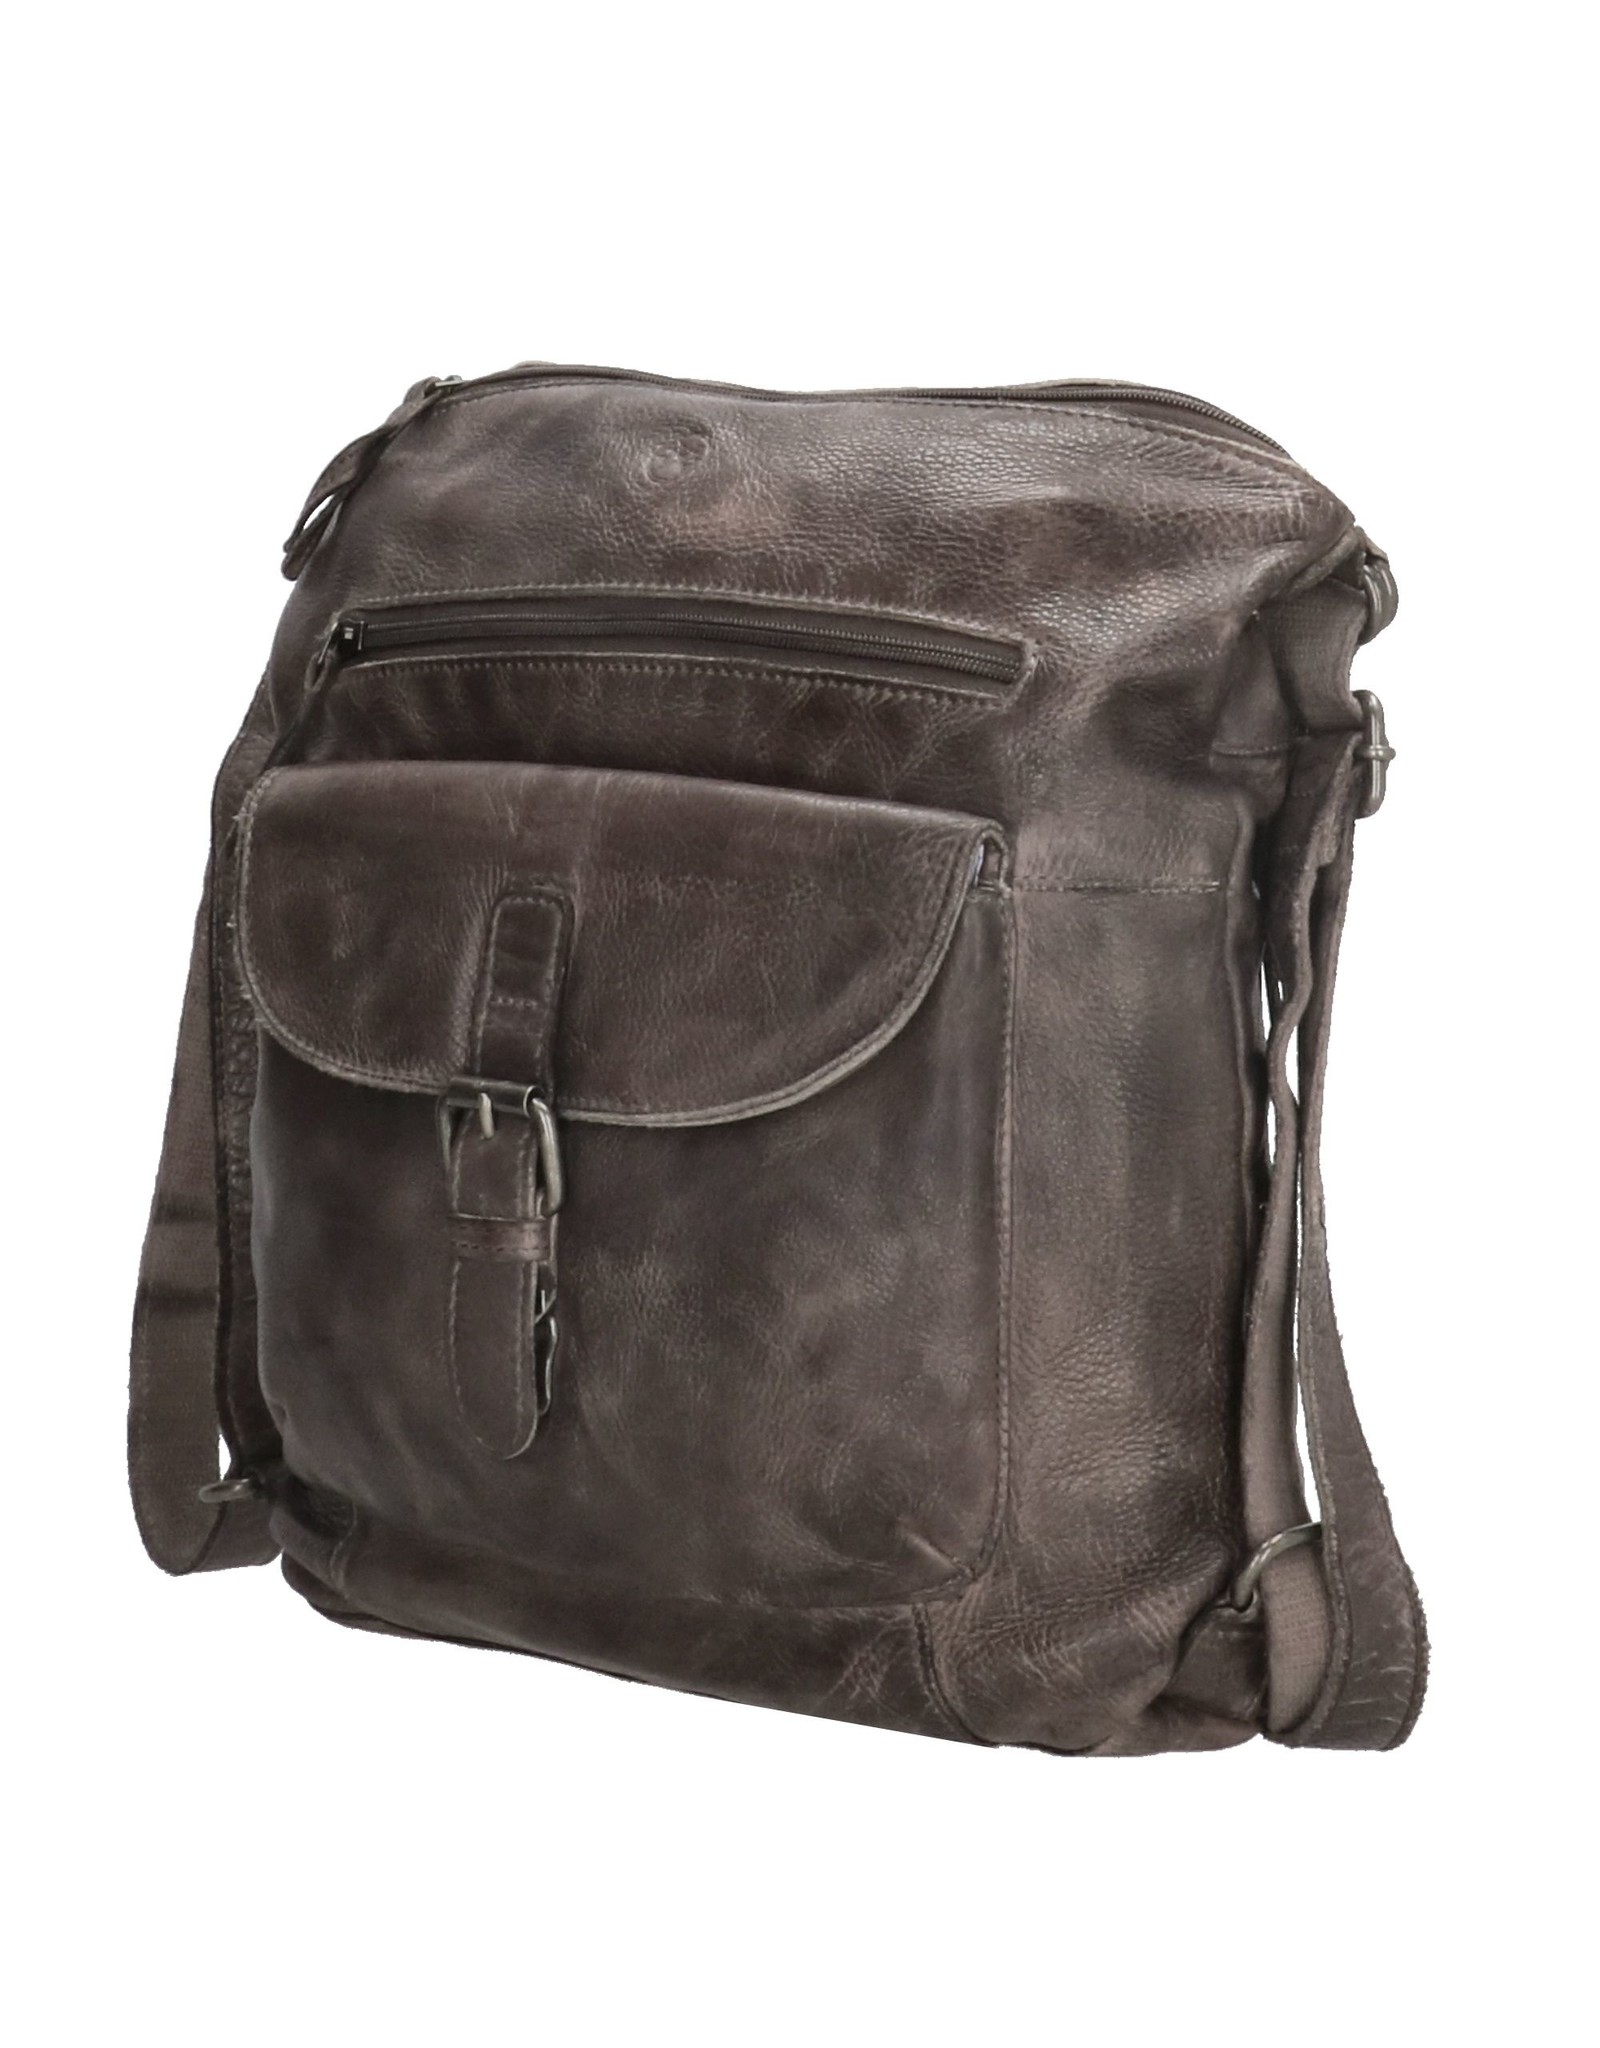 Hide & Stitches Leather backpacks Leather shoppers - Hide & Stitches Paint Rock Backpack - Shoulder bag taupe